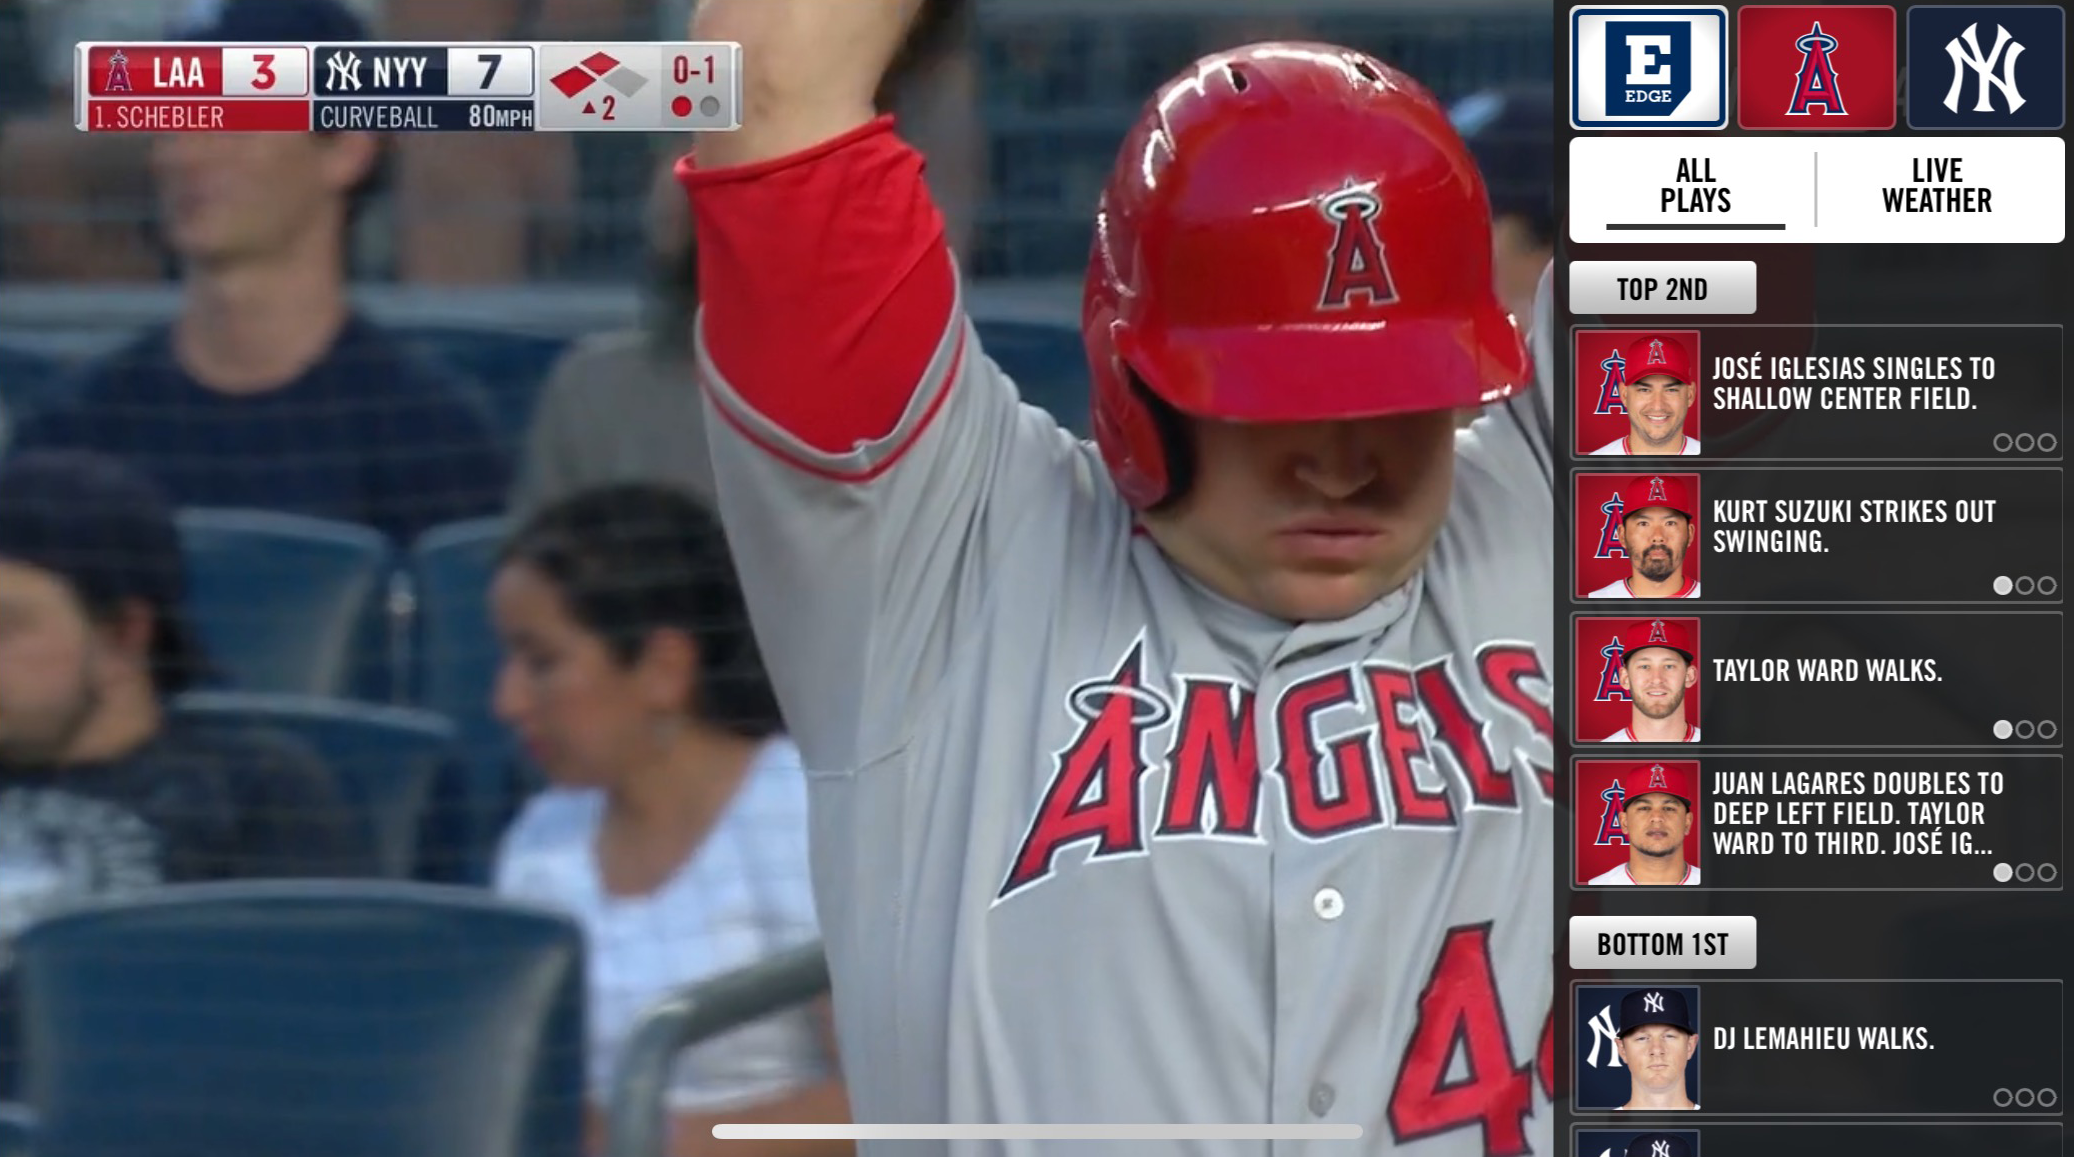 In Yes Network App New Yes Edge Feature Adds Dynamic Graphic Overlays To Live Game Streams